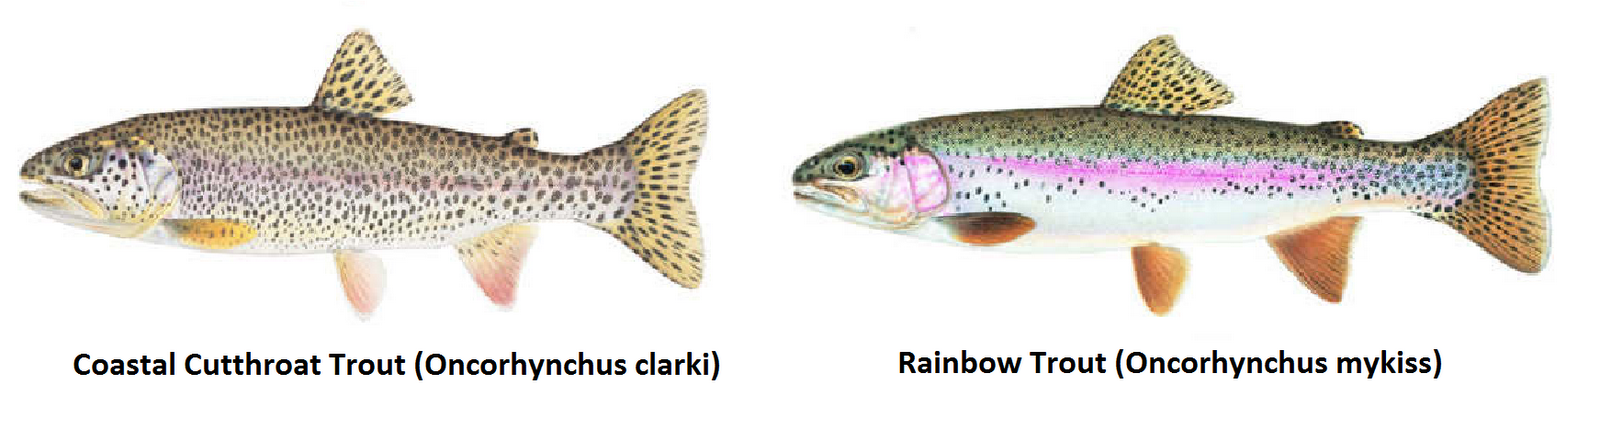 Invasion of the Rainbow Trout